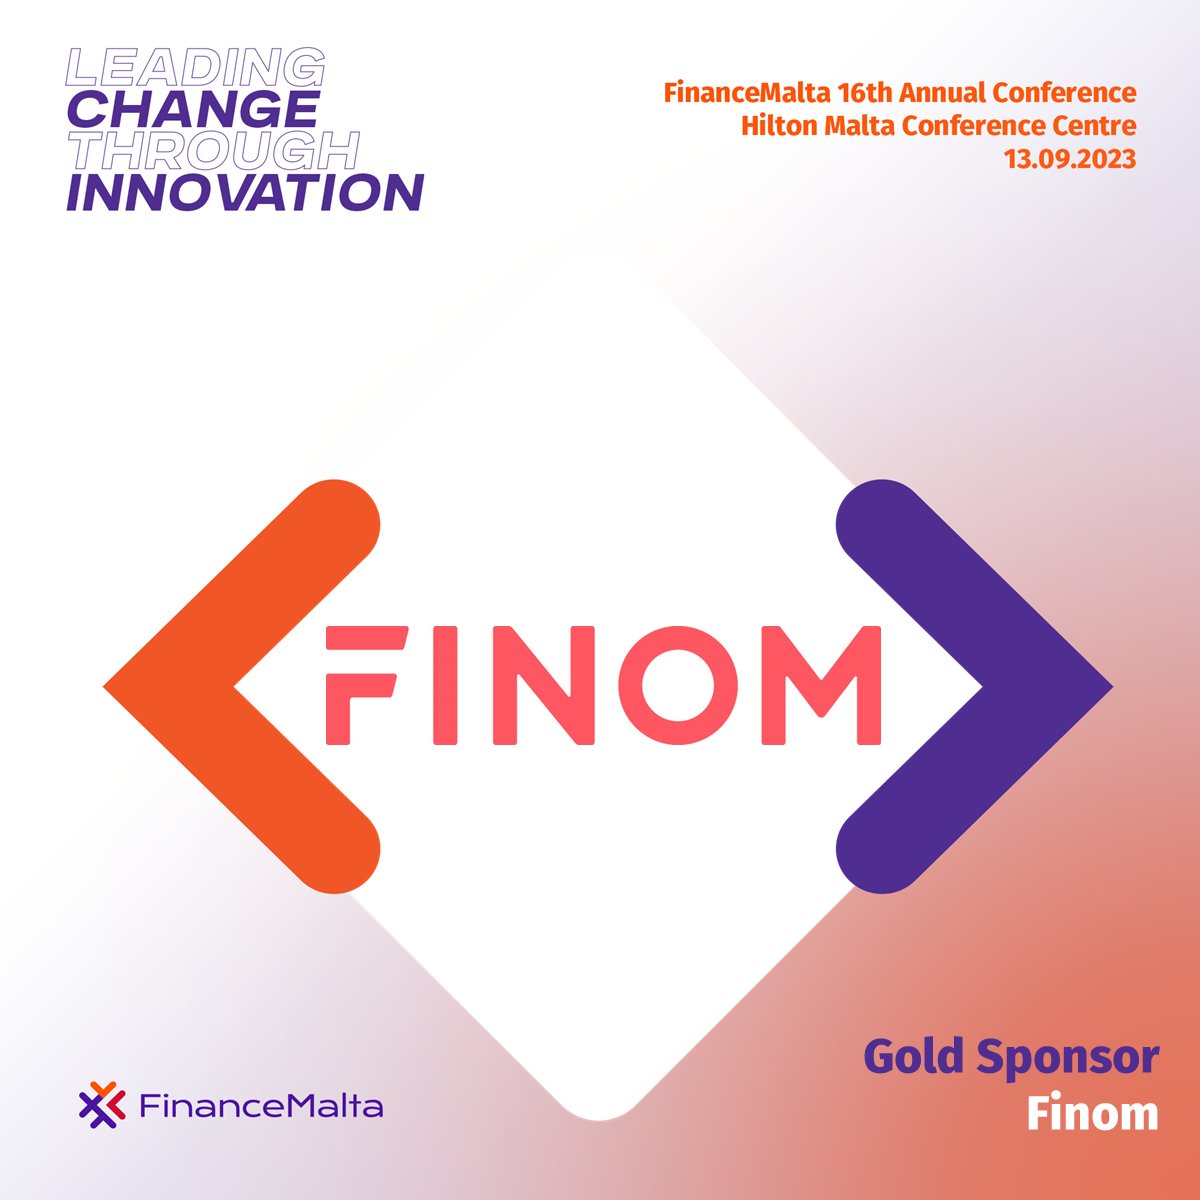 ++SPONSOR ANNOUNCEMENT++

Finom is an official Gold Sponsor for the FinanceMalta 16th Annual Conference.

Buy tickets 👉 fmannualconference.org

#FM16AC #GoldSponsor